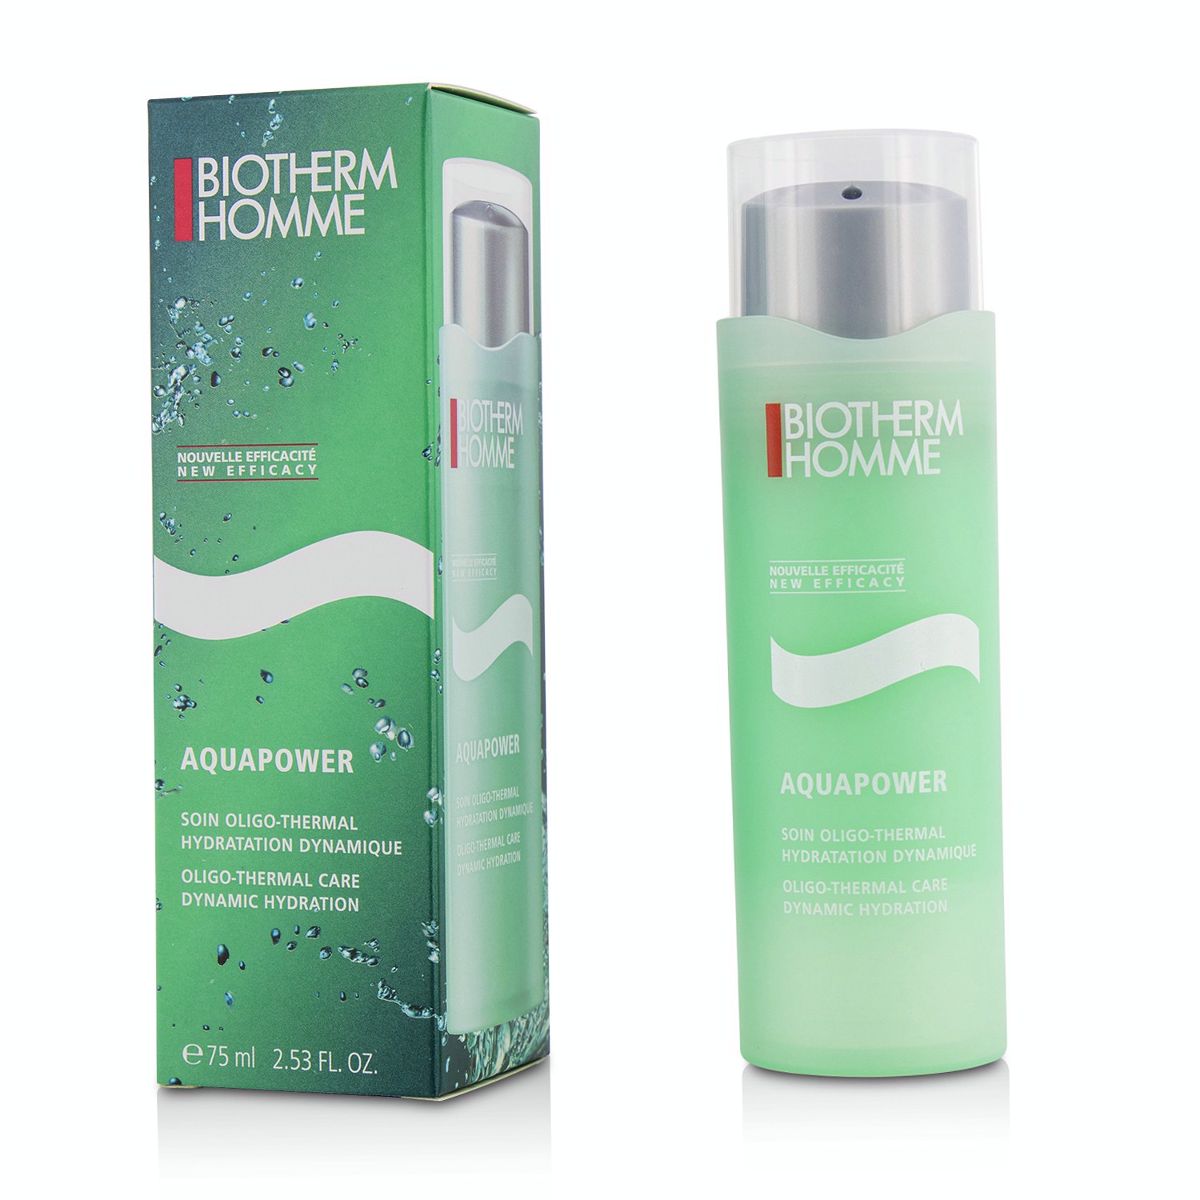 Homme Aquapower (New Packaging) Biotherm Image